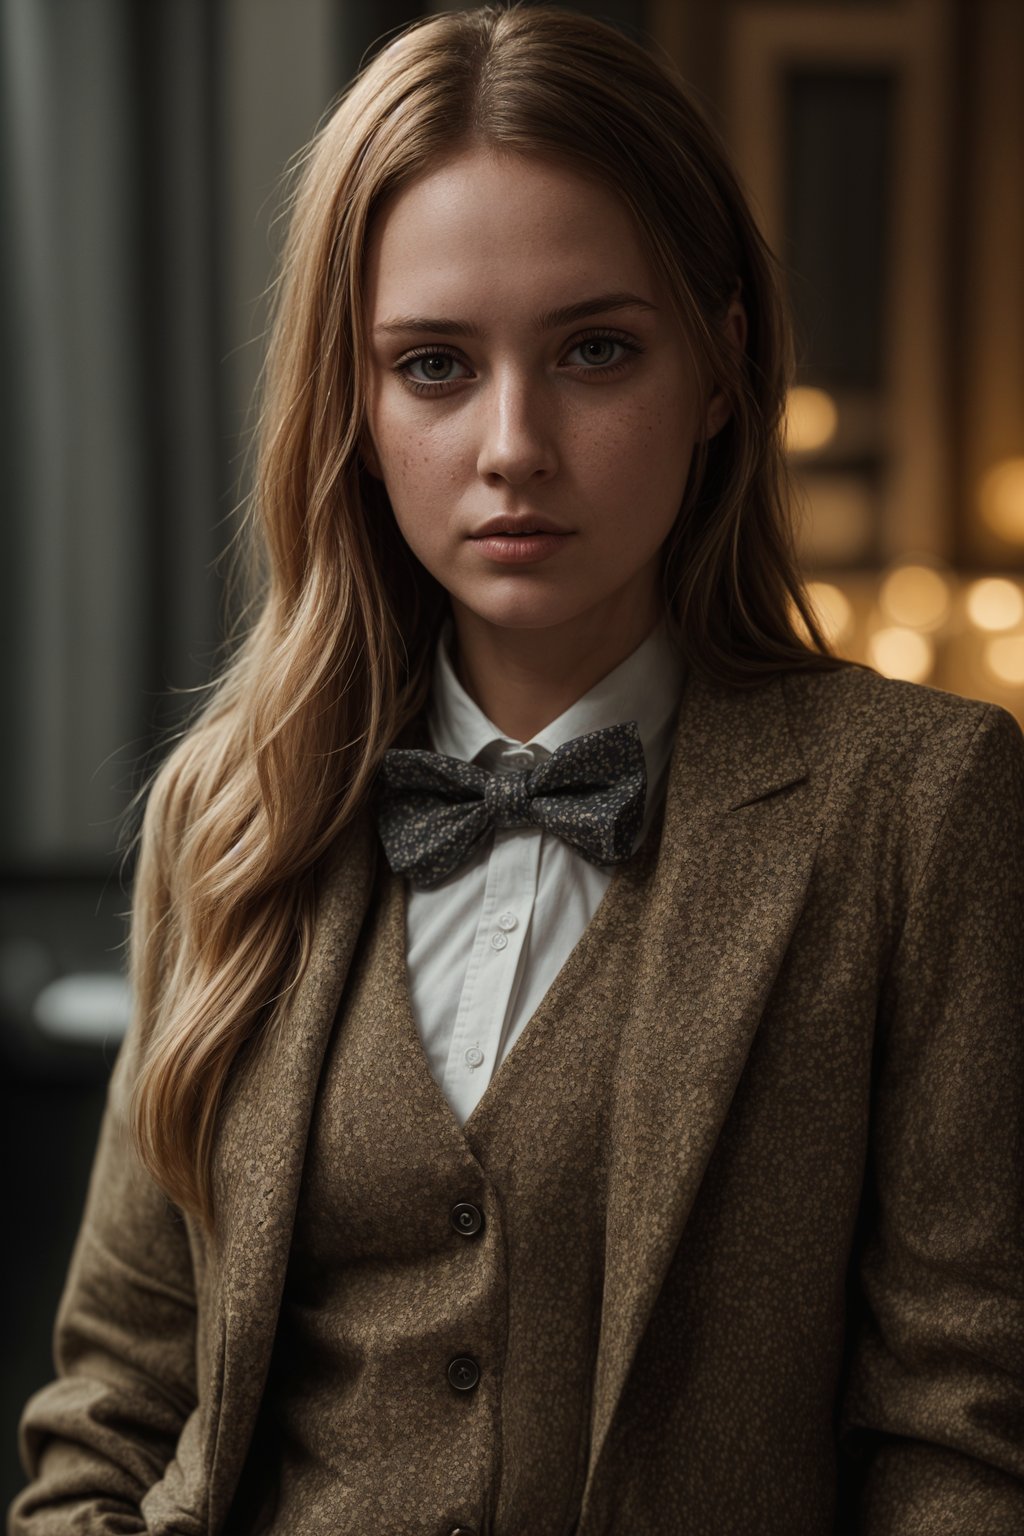 woman wearing a trendy tweed suit with a patterned bow tie and a contrasting vest